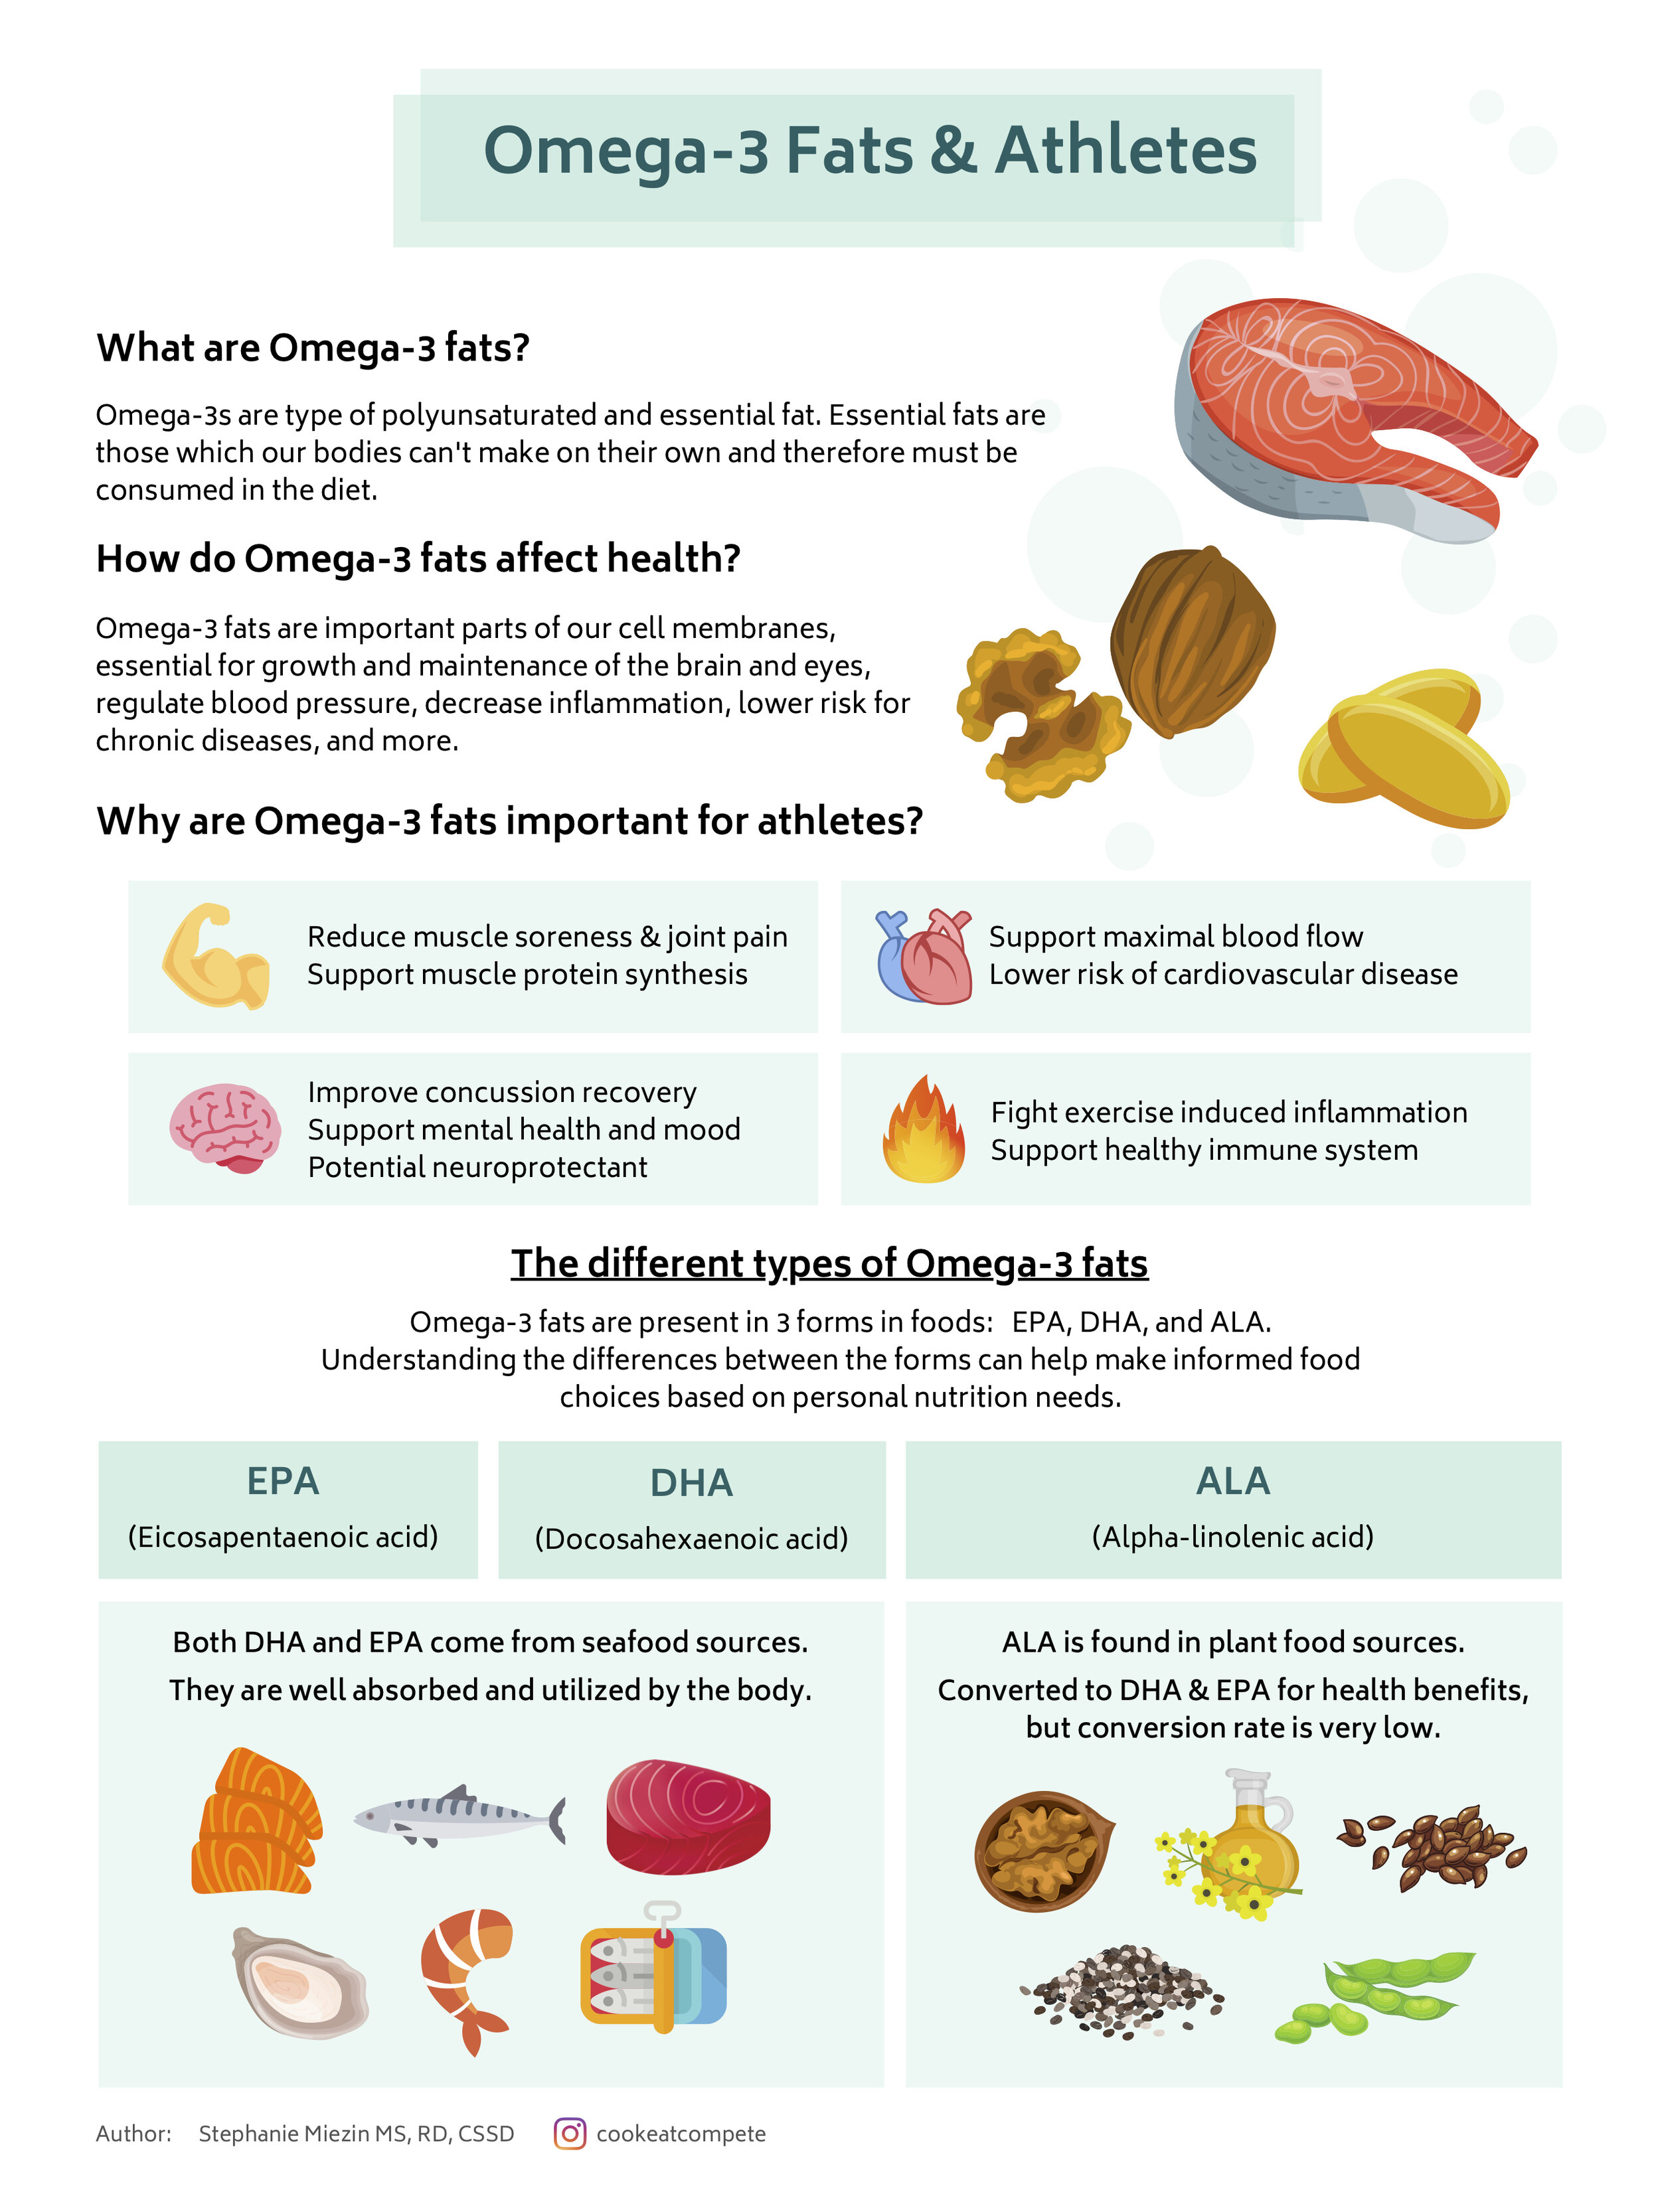 Omega- fatty acids and inflammation in athletes